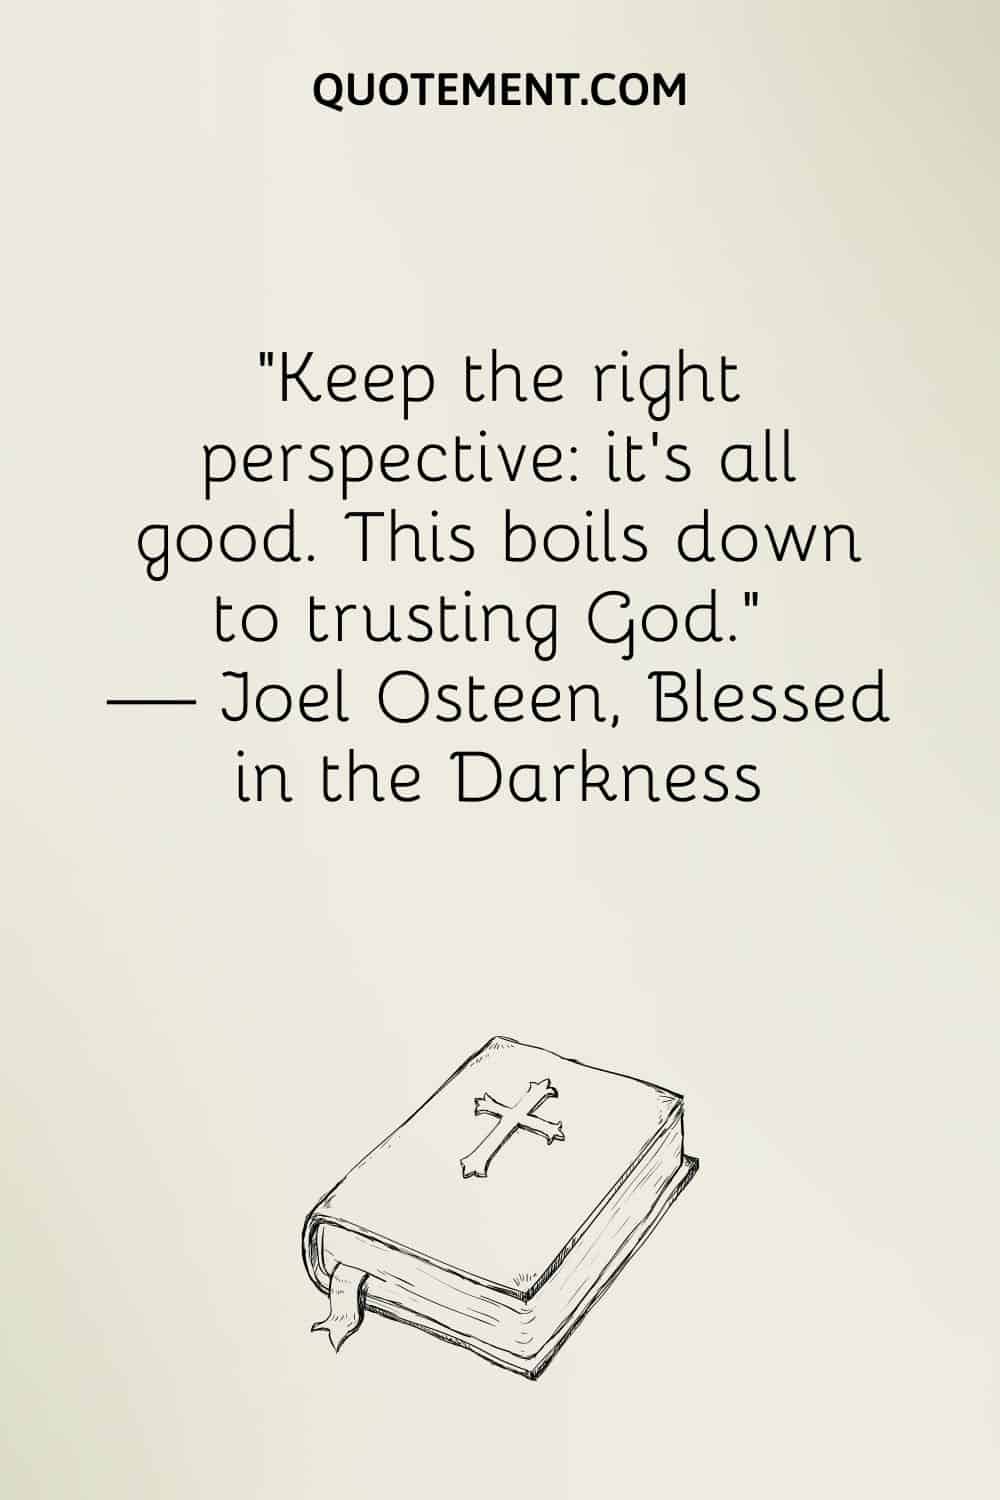 Keep the right perspective it's all good. This boils down to trusting God